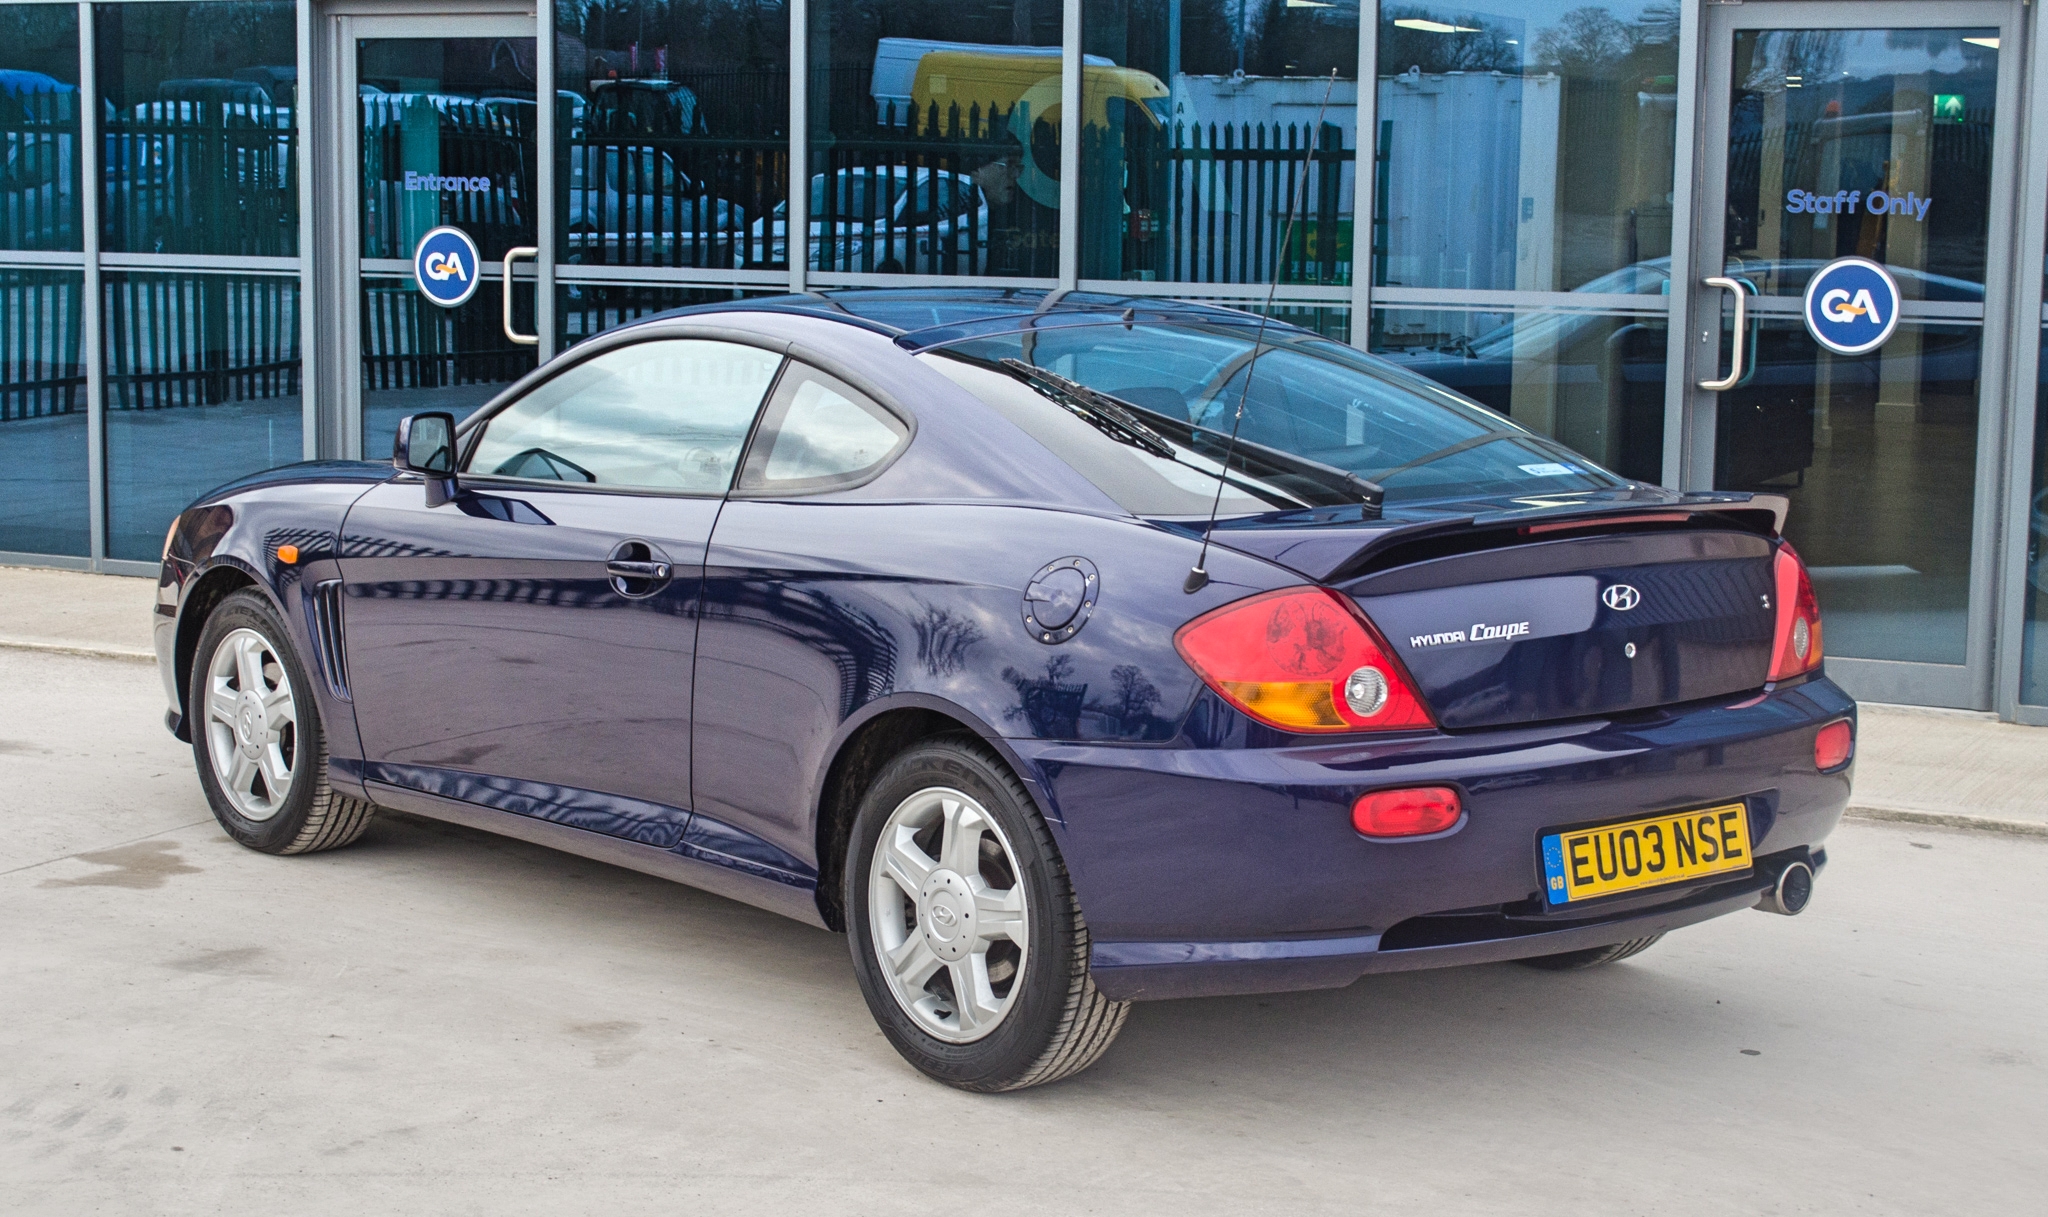 2003 Hyundai Coupe 1.6 S 1600 cc 3 door coupe - Image 8 of 56